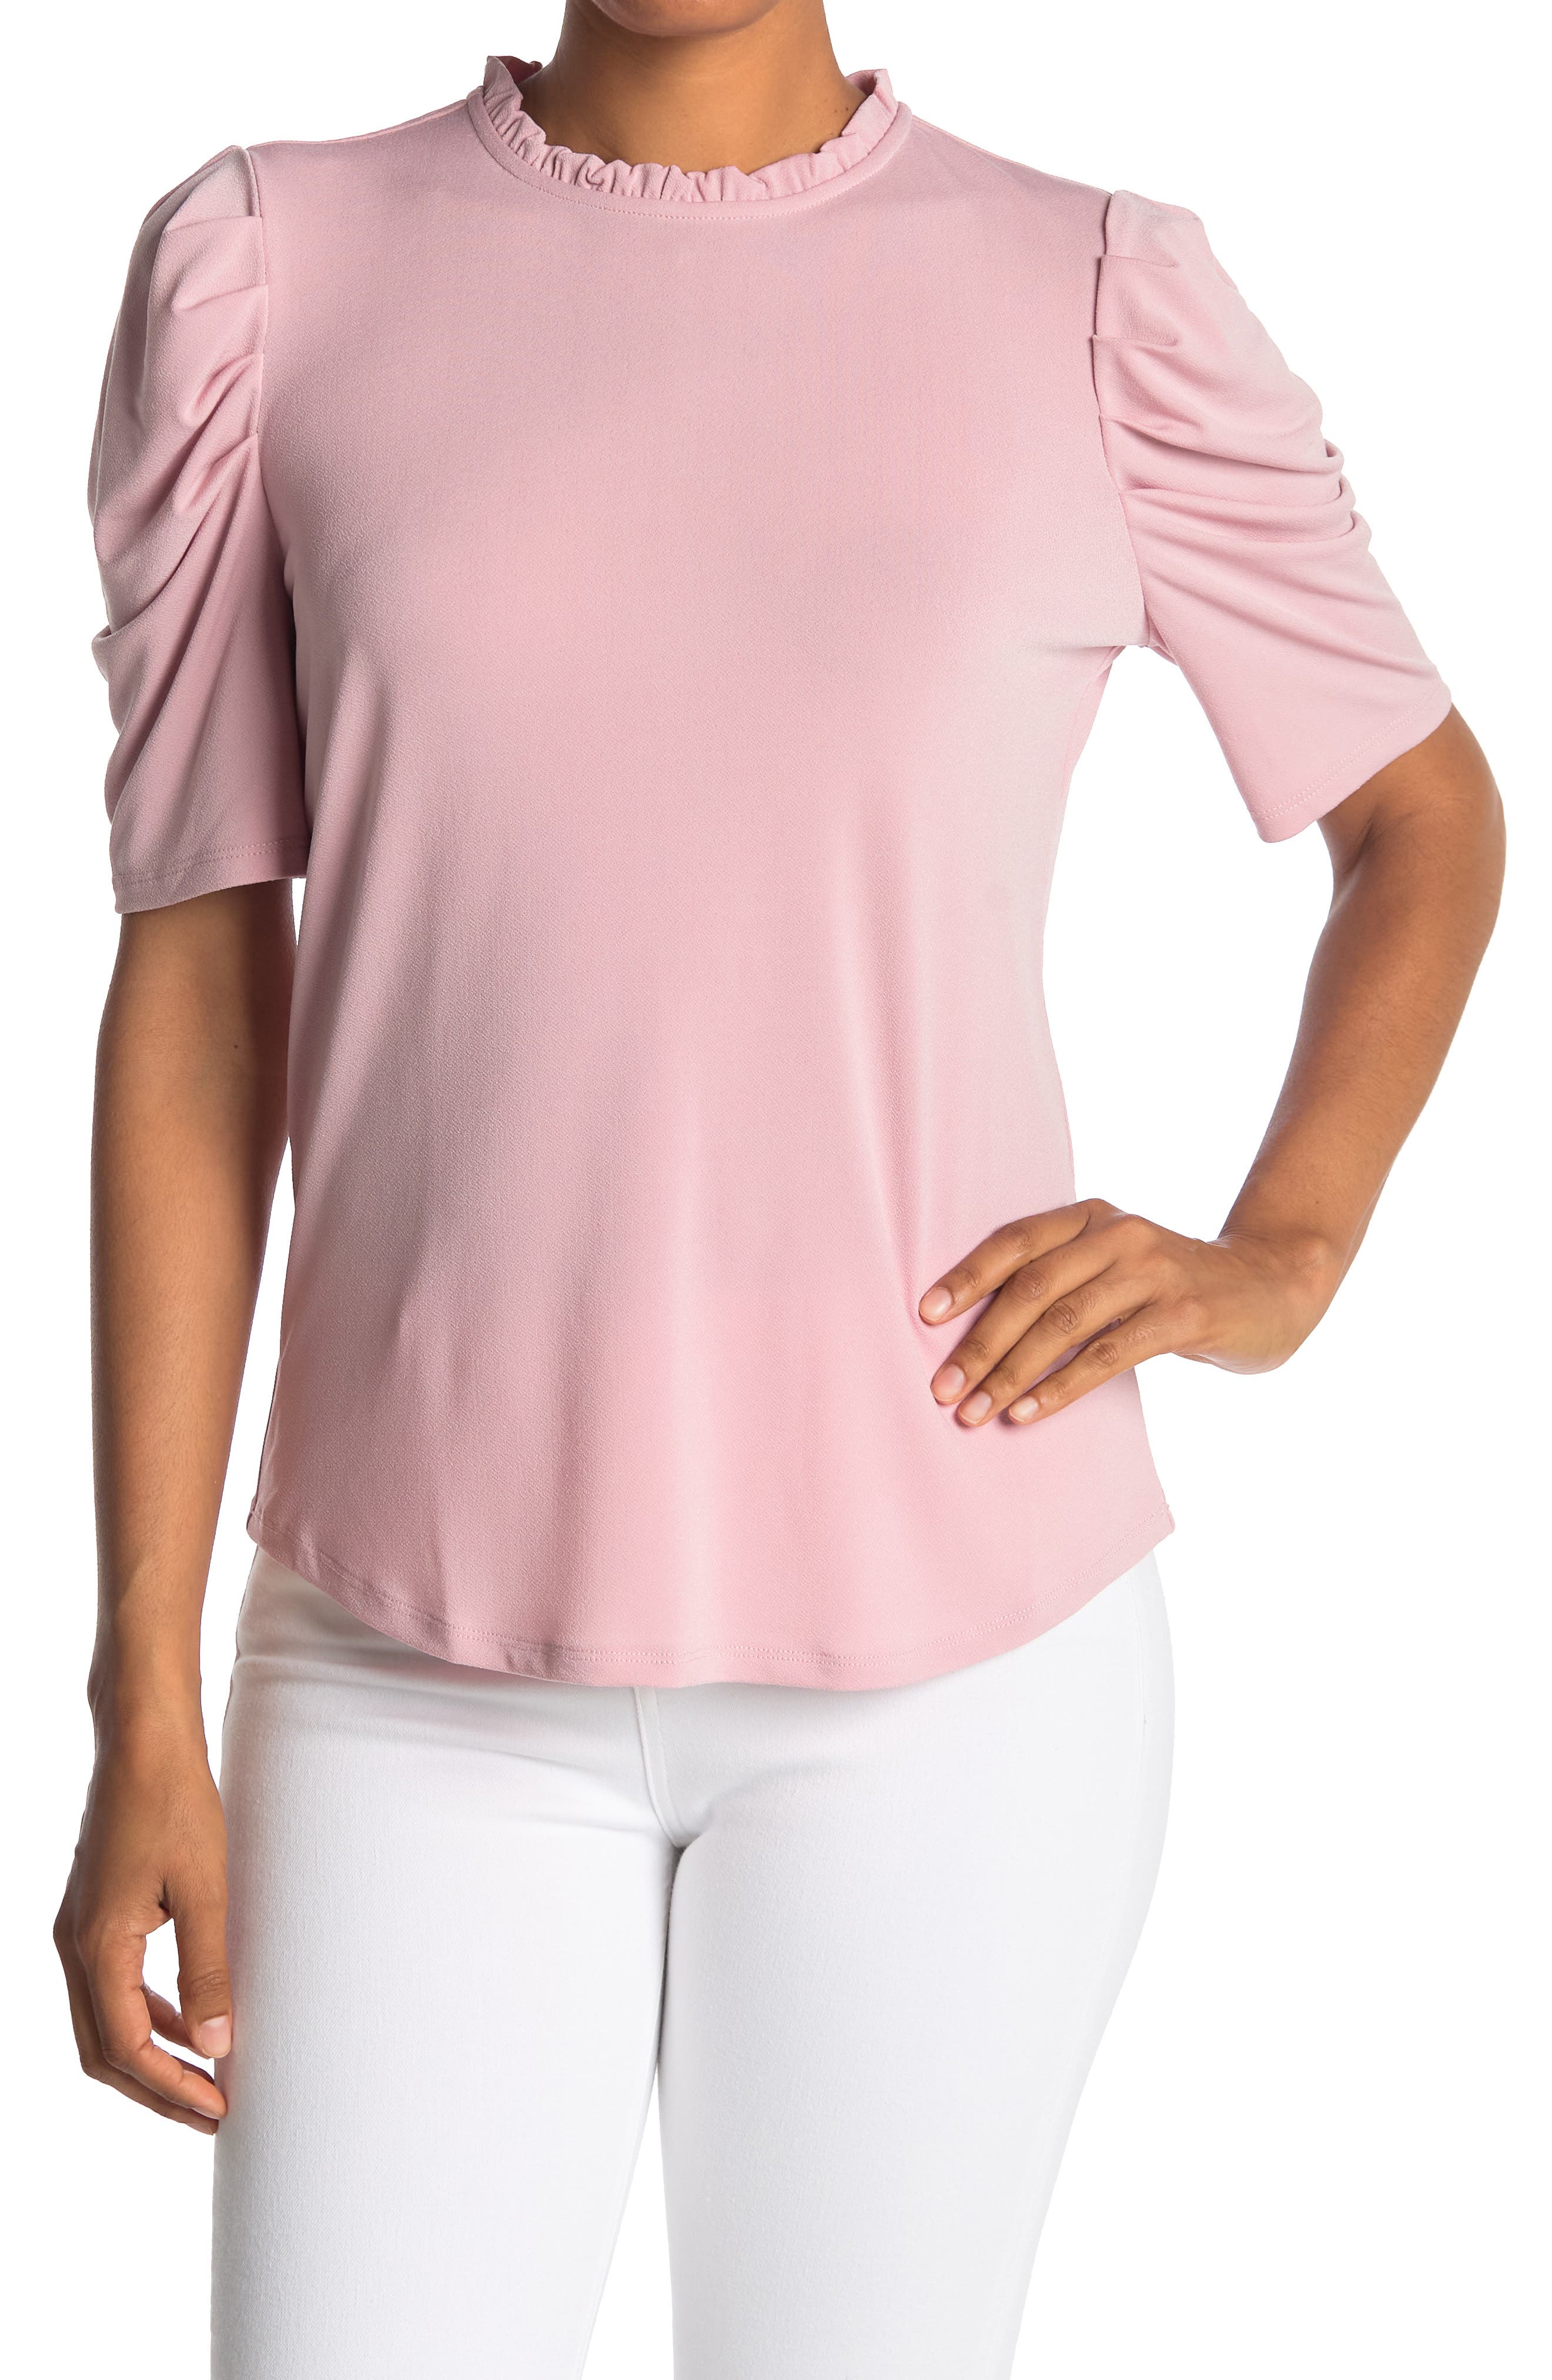 Adrianna Papell Ruffle Neck 3/4 Sleeve Moss Crepe Top In Light/pastel Pink2